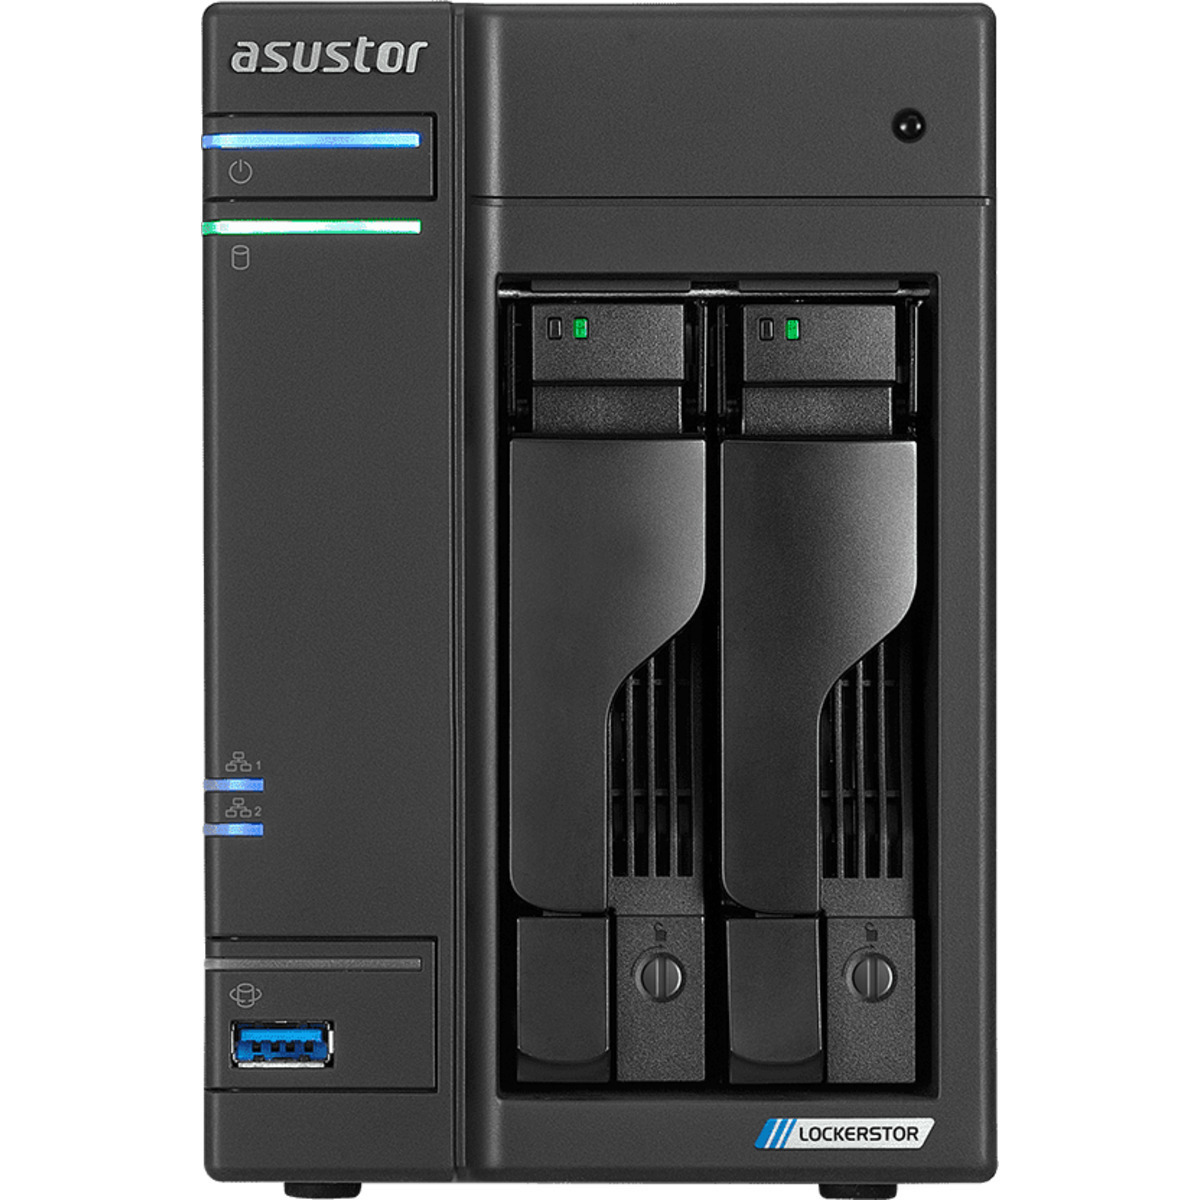 ASUSTOR AS6602T Lockerstor 2 20tb 2-Bay Desktop Multimedia / Power User / Business NAS - Network Attached Storage Device 2x10tb Western Digital Red Pro WD102KFBX 3.5 7200rpm SATA 6Gb/s HDD NAS Class Drives Installed - Burn-In Tested - FREE RAM UPGRADE AS6602T Lockerstor 2